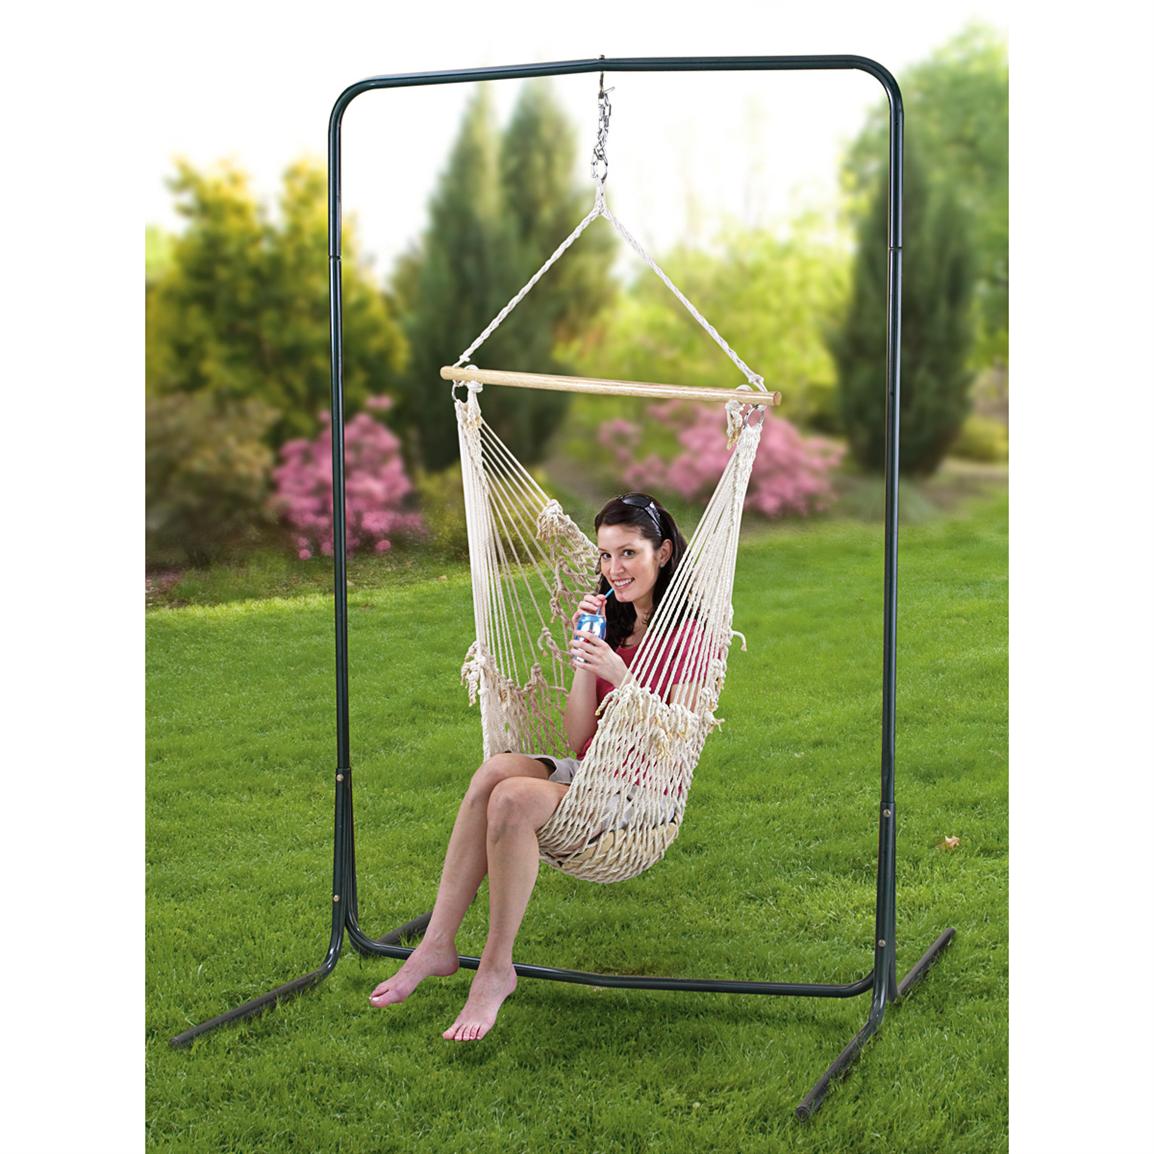 Texsport® Deluxe Hammock Chair / Stand 172770, Camping